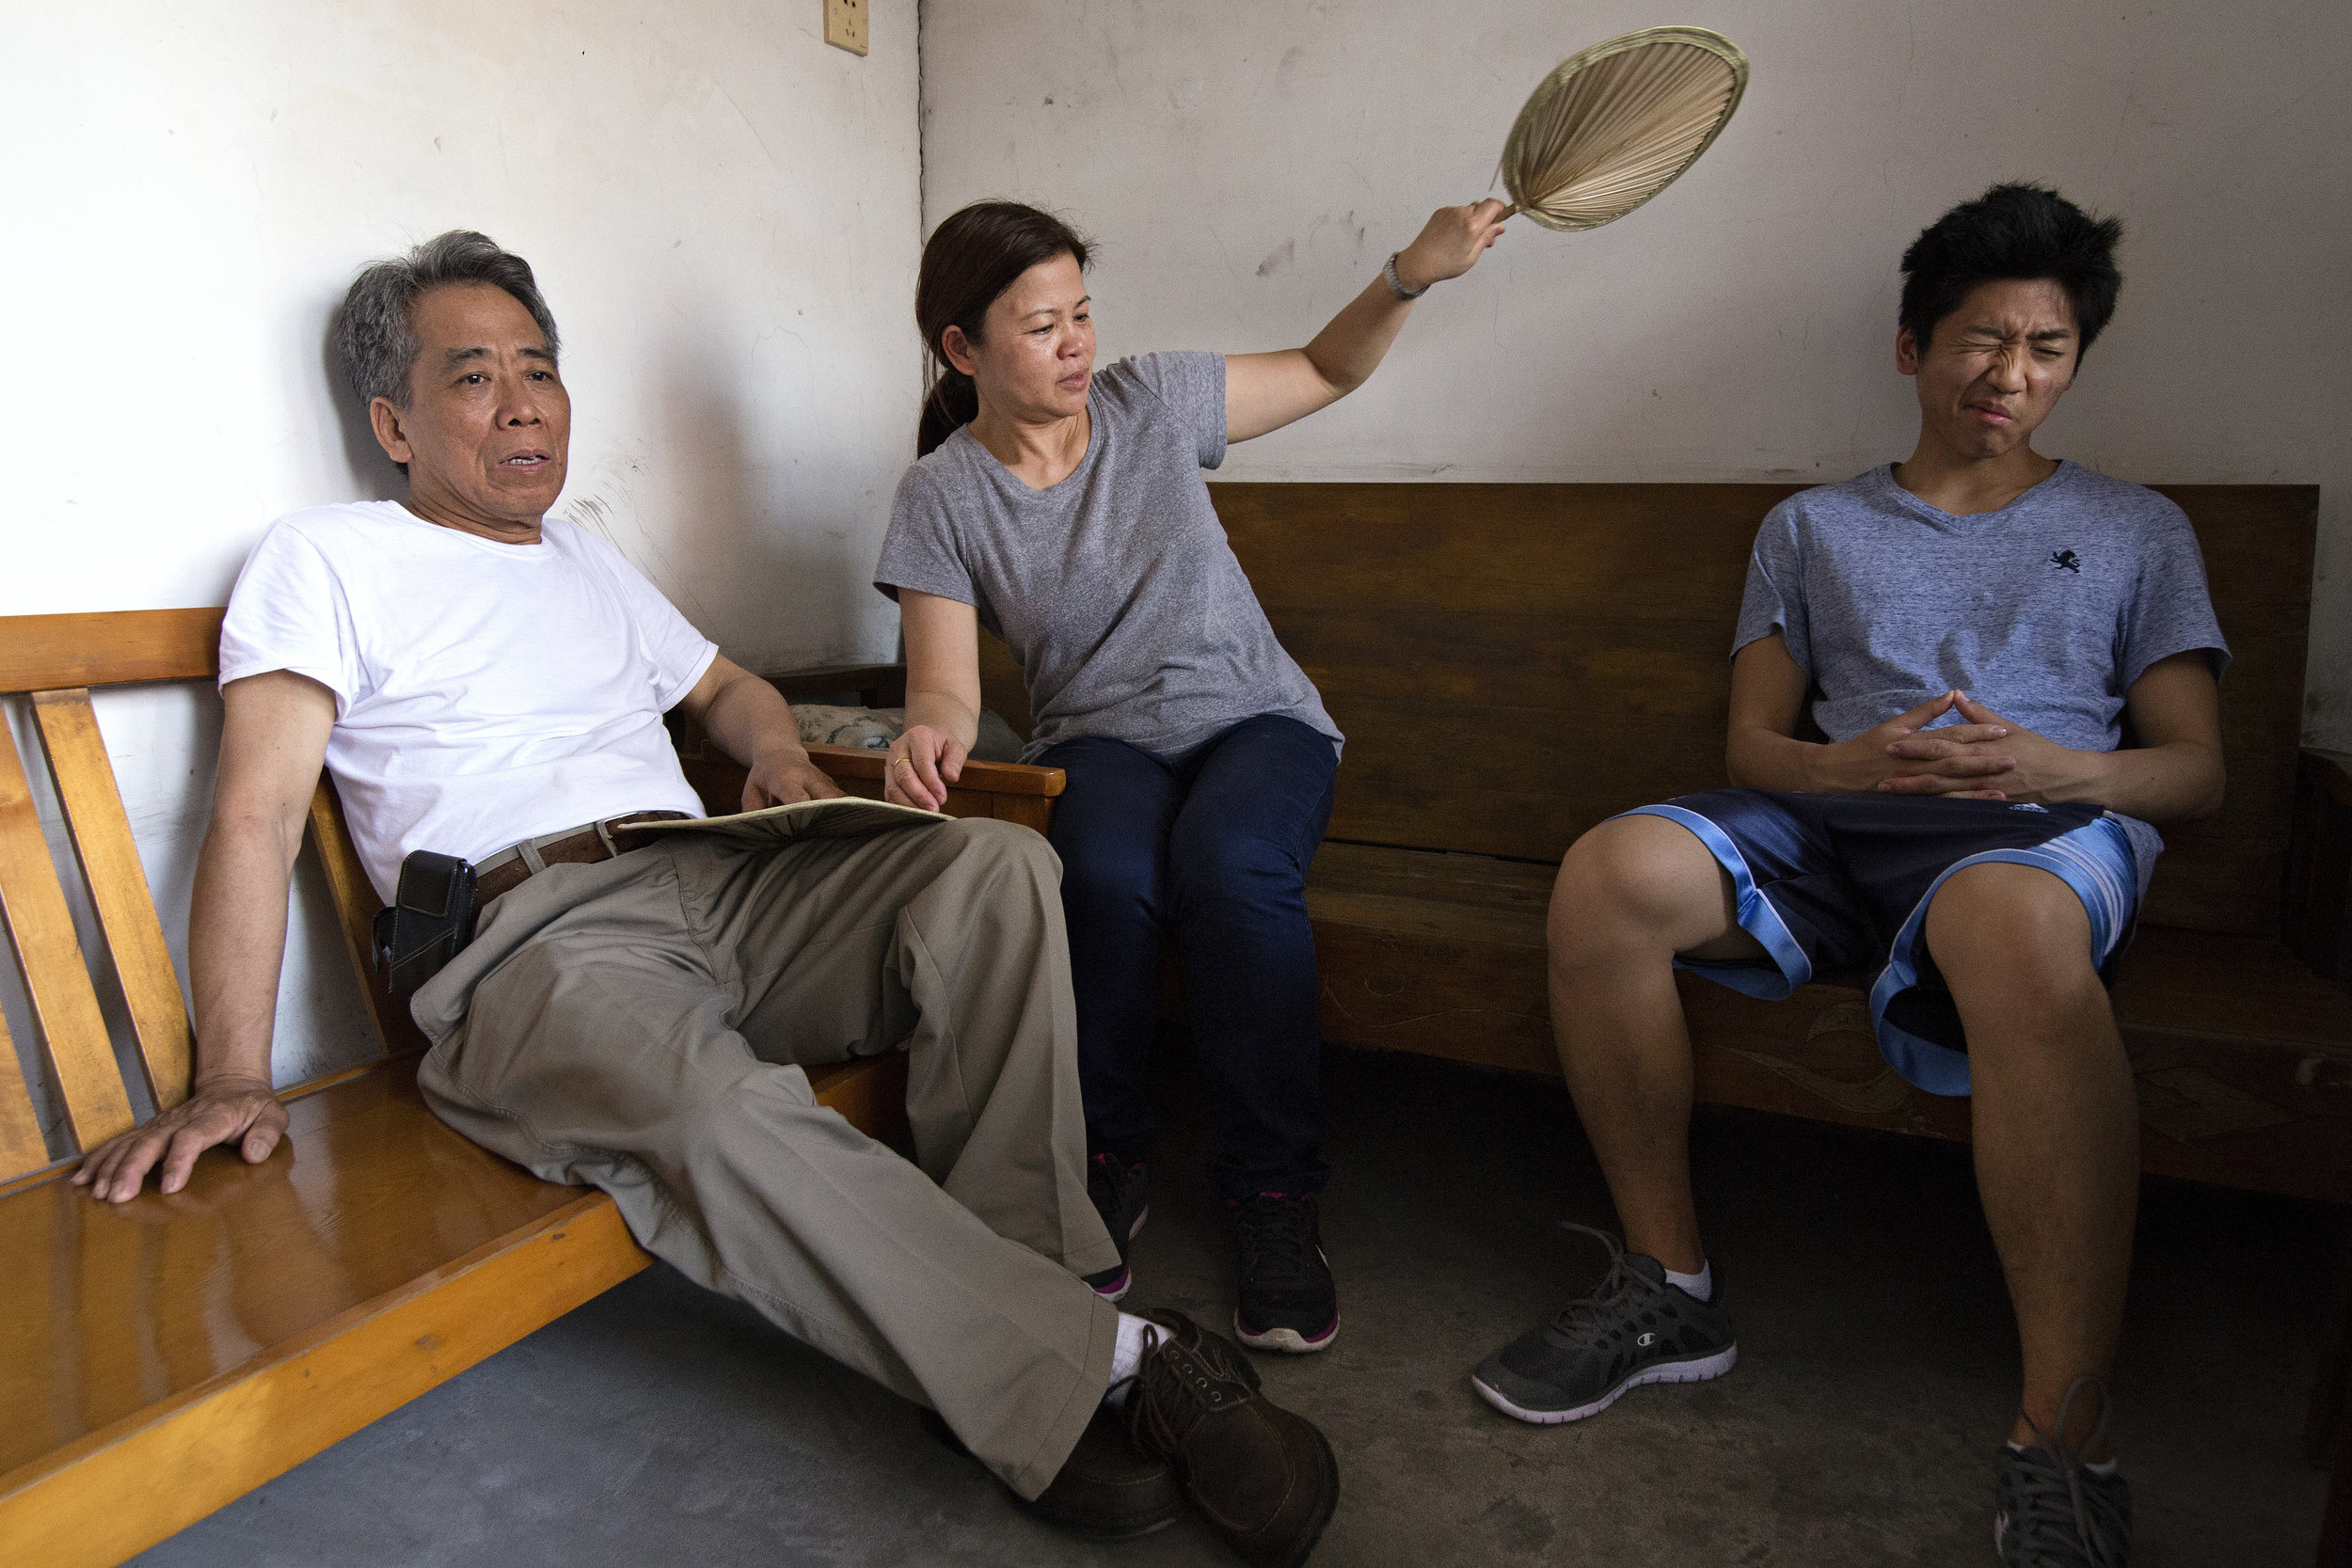  Father, mother and my brother, Ted, sit on wooden benches handcrafted by Gongong. “This was also Gonggong’s bed. This is where he slept,” Mother remarks, referring to the bench on the right.&nbsp; 